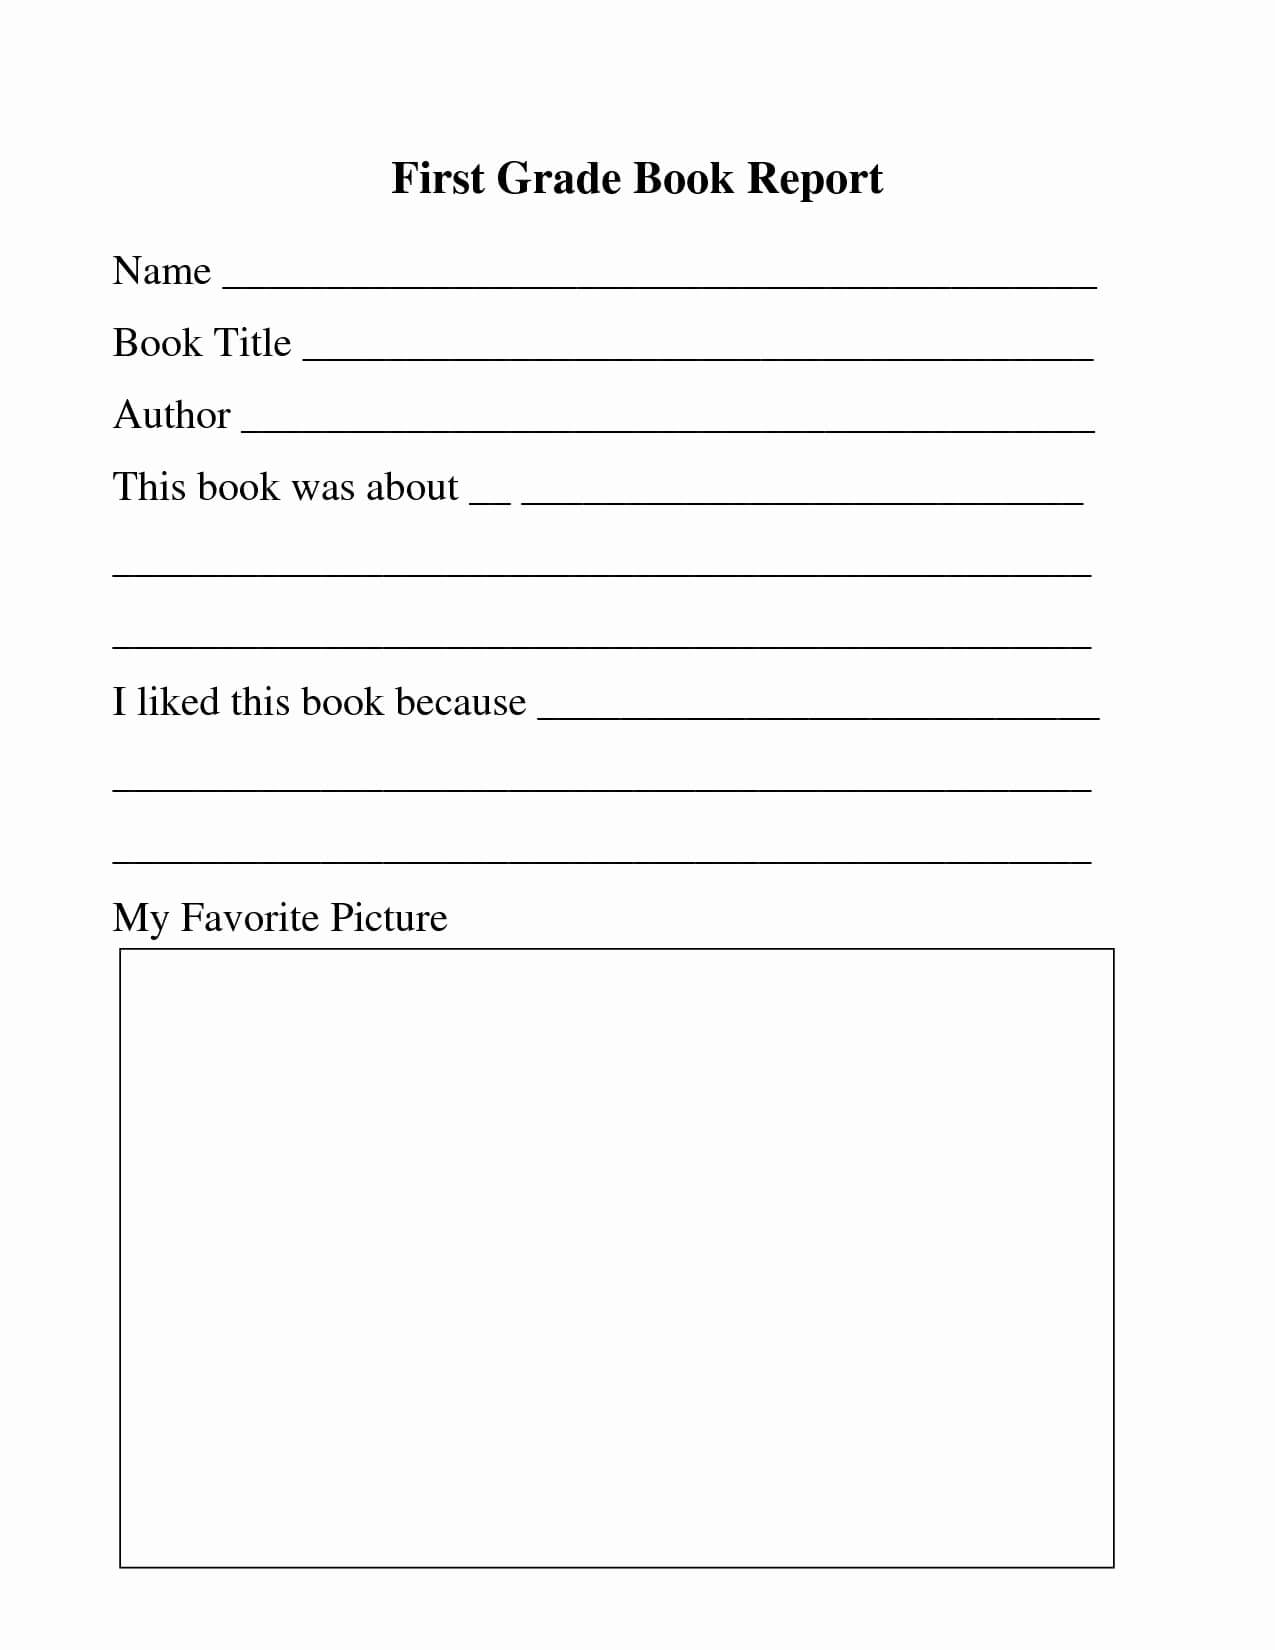 Printable Book Template Or First Grade Book Review Printable In First Grade Book Report Template